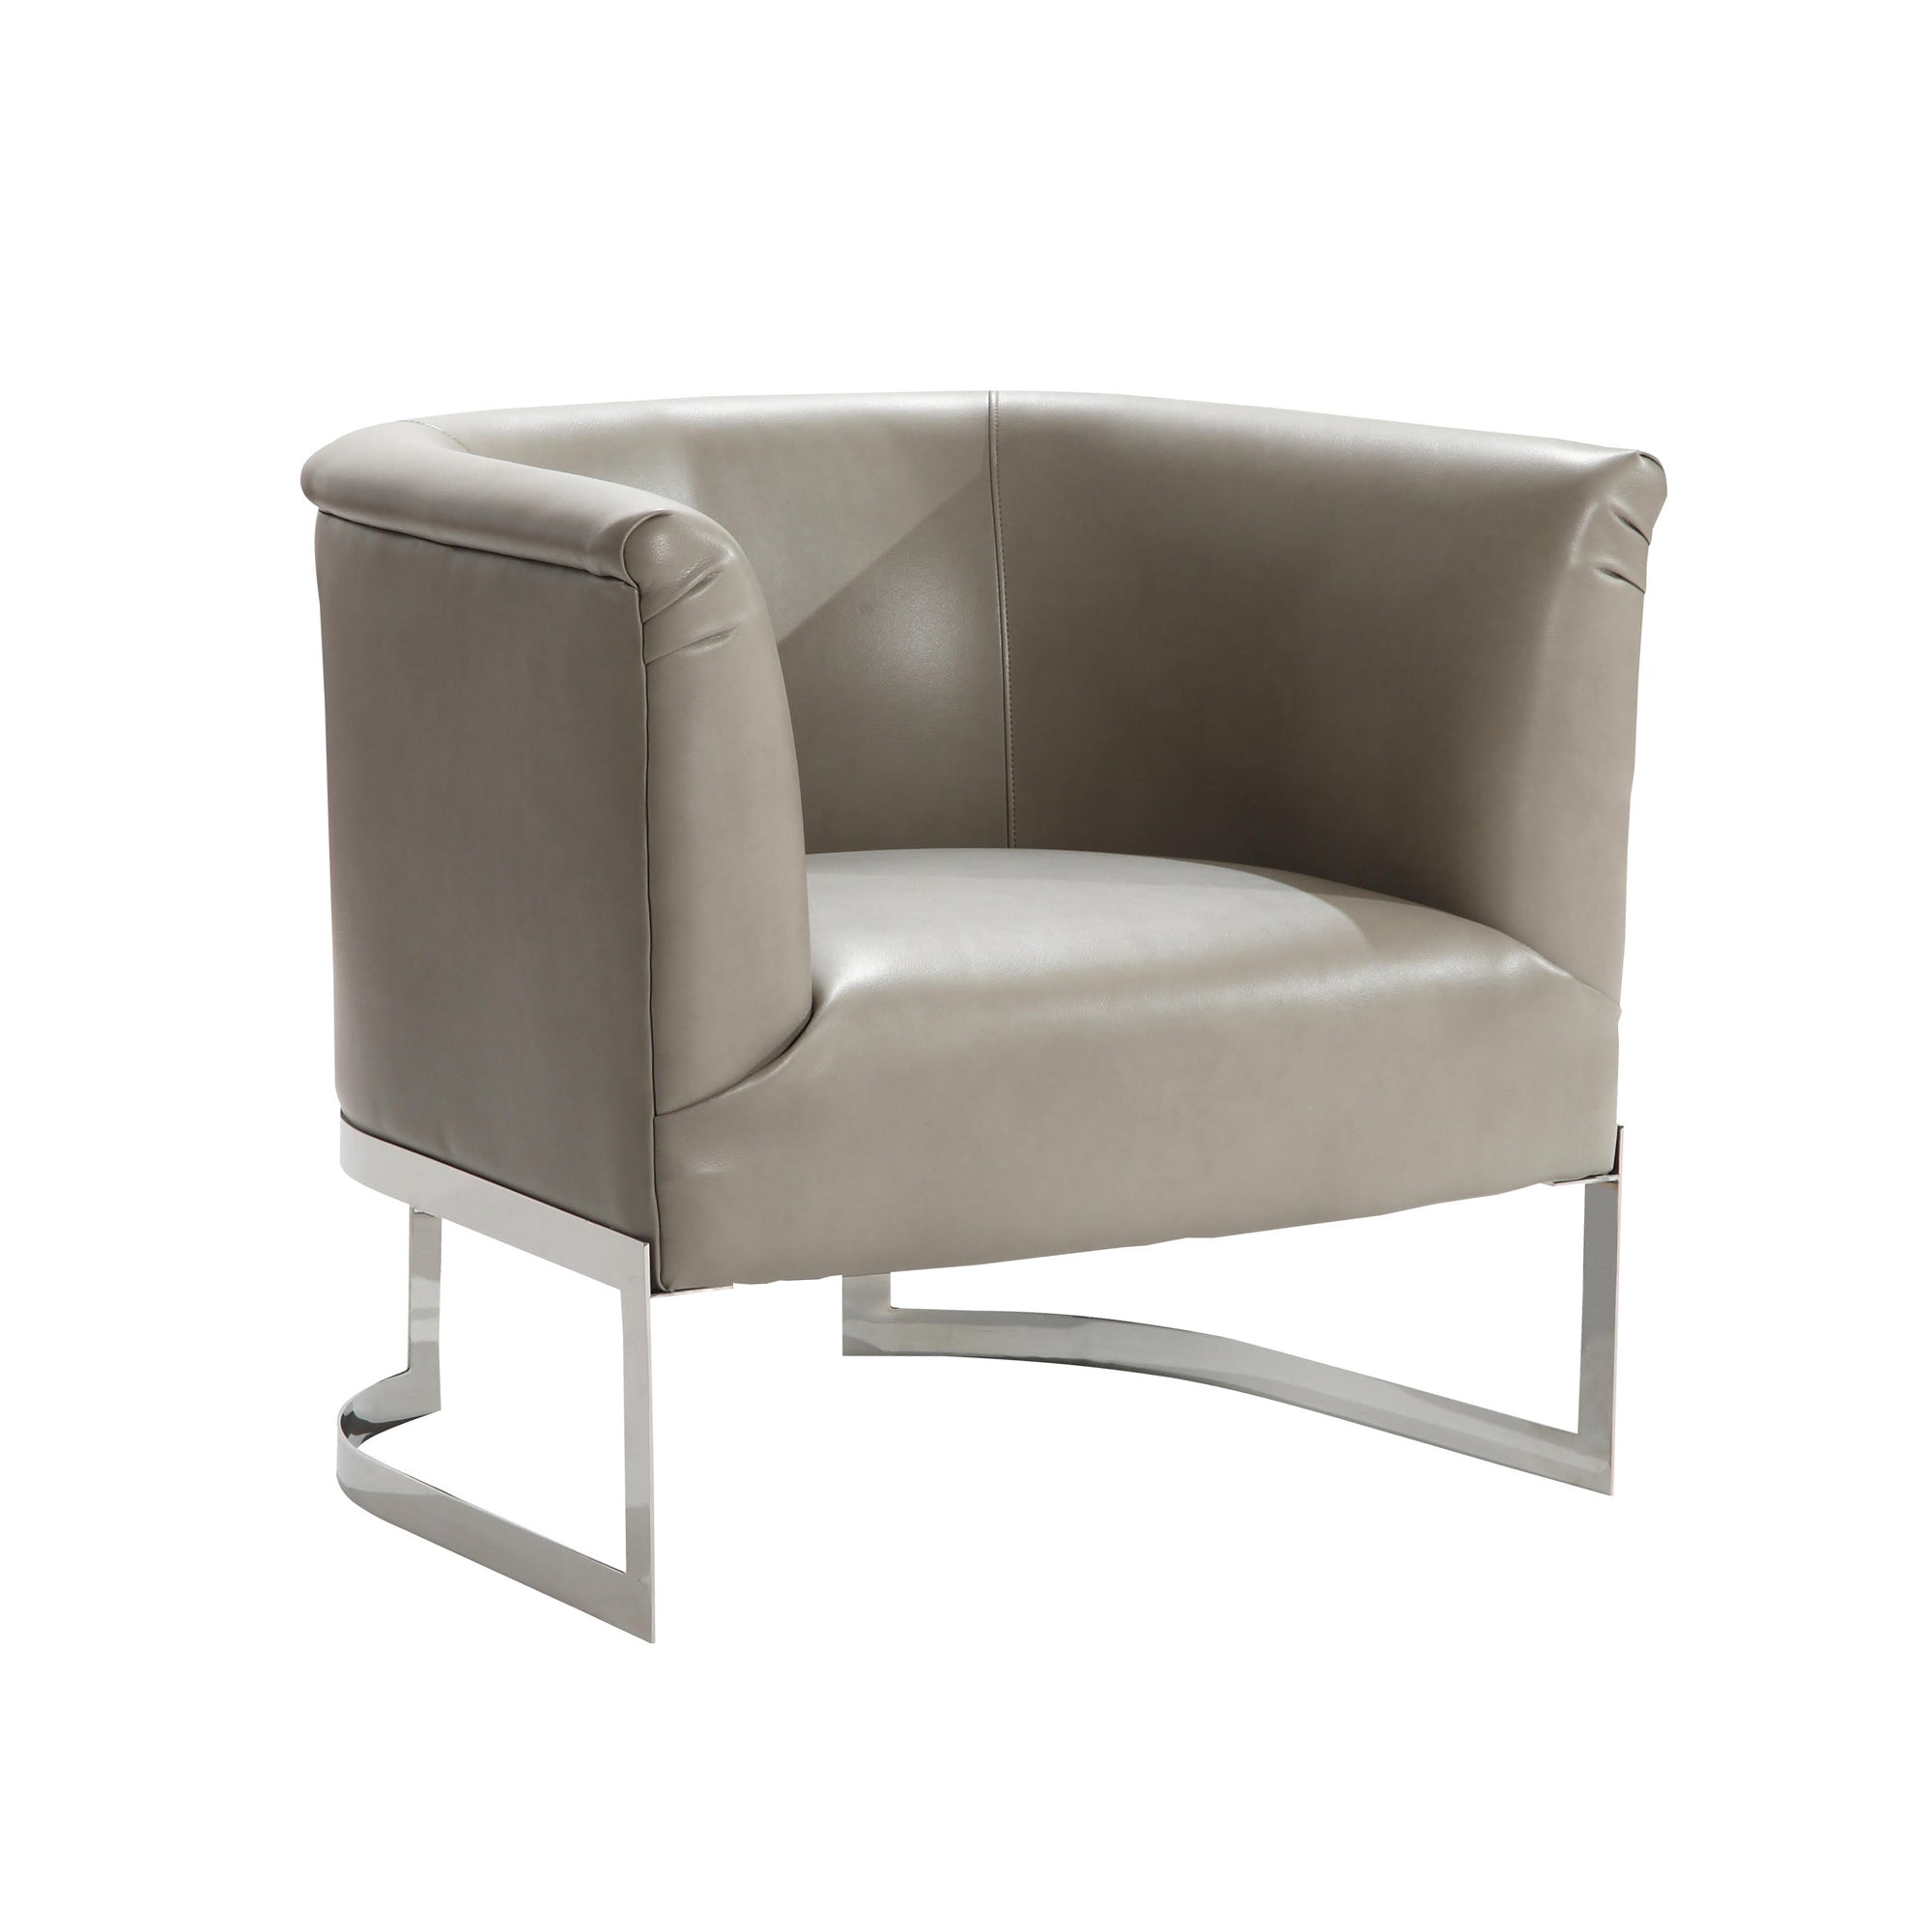 Armen Living Lc560chsm Elite Contemporary Accent Chair In Smoke And Steel Finish